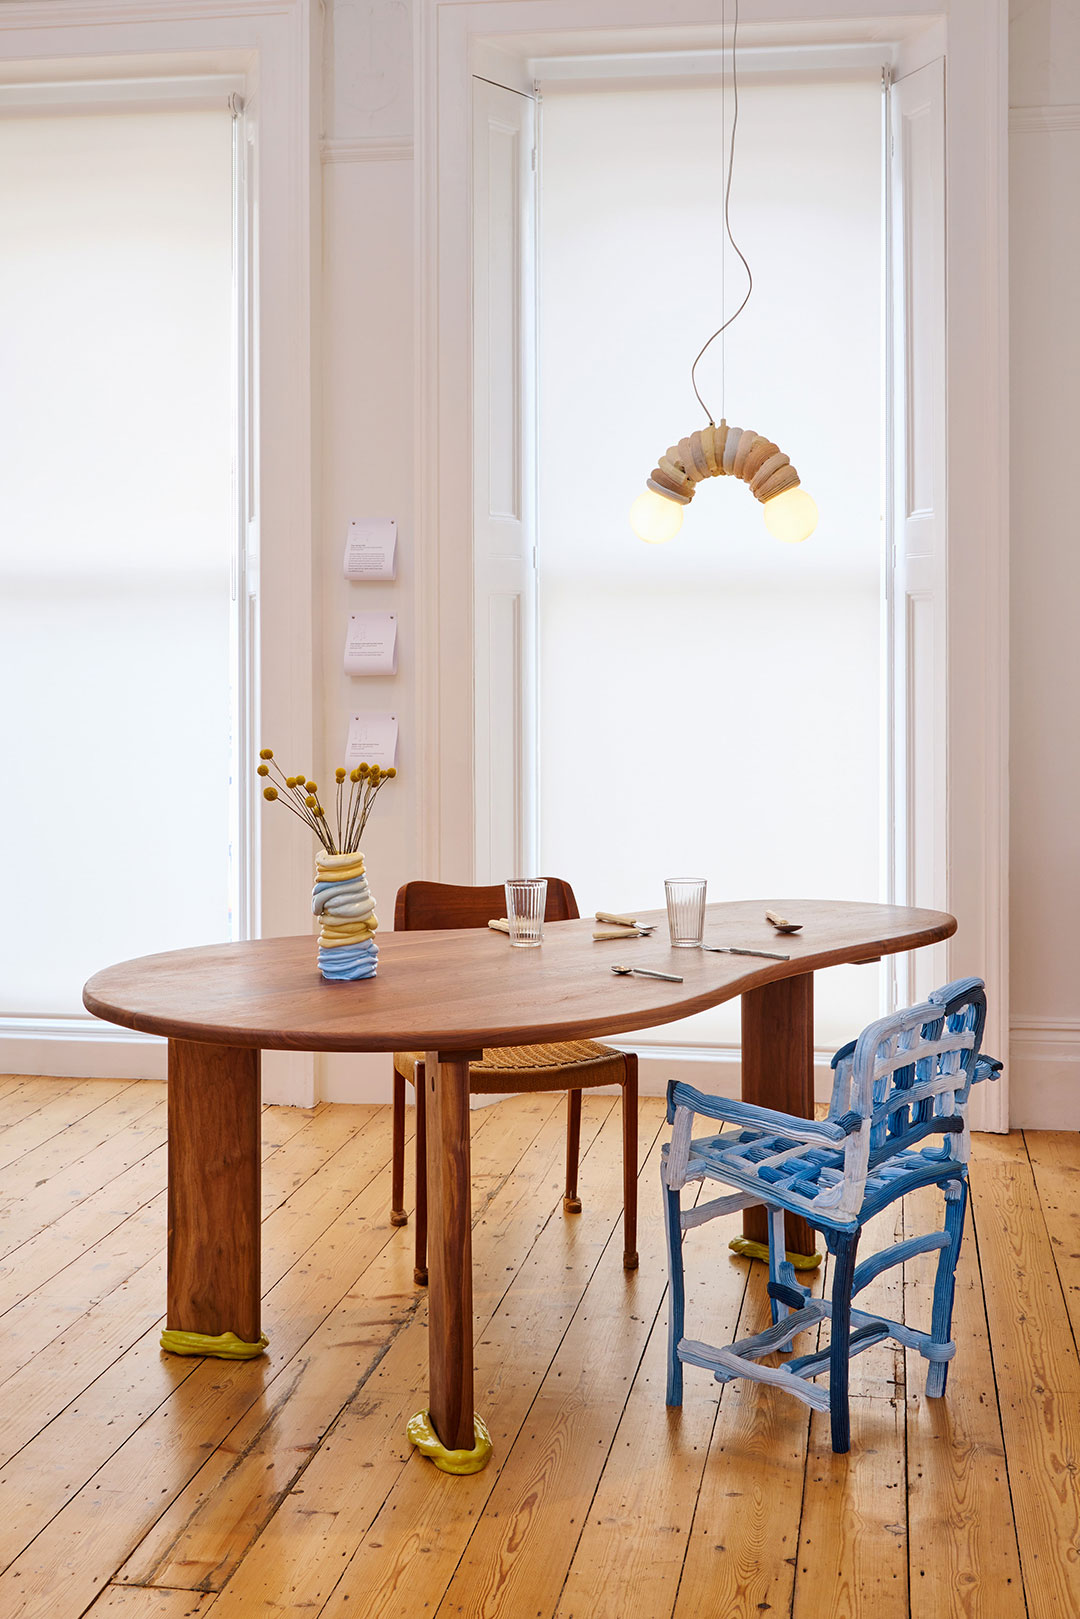 Table, chair and lamp designed by James Shaw